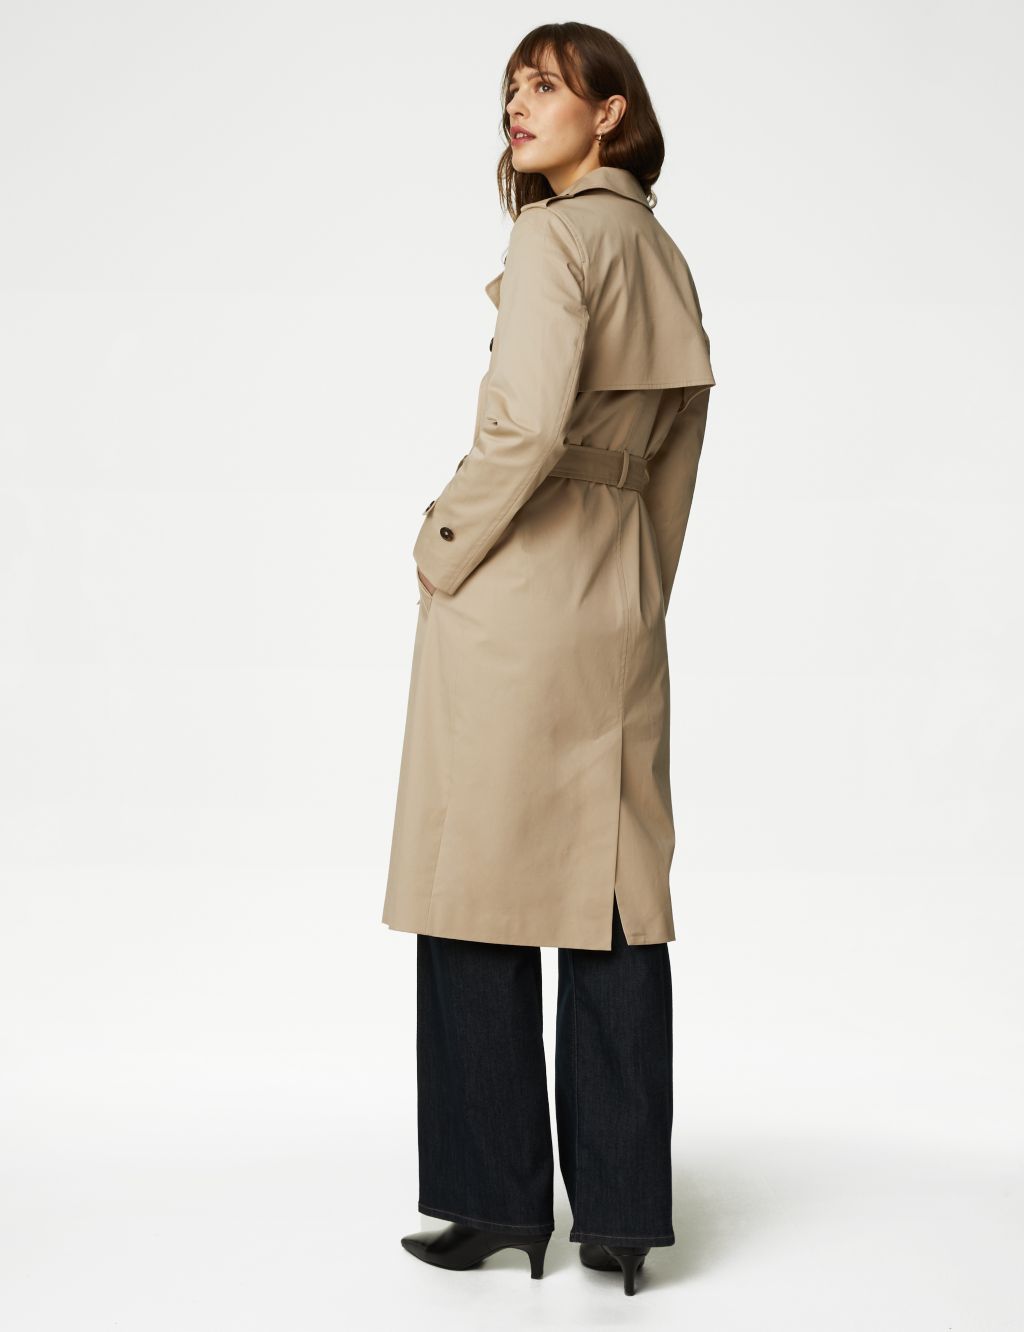 Petite Cotton Rich Double Breasted Trench Coat image 5